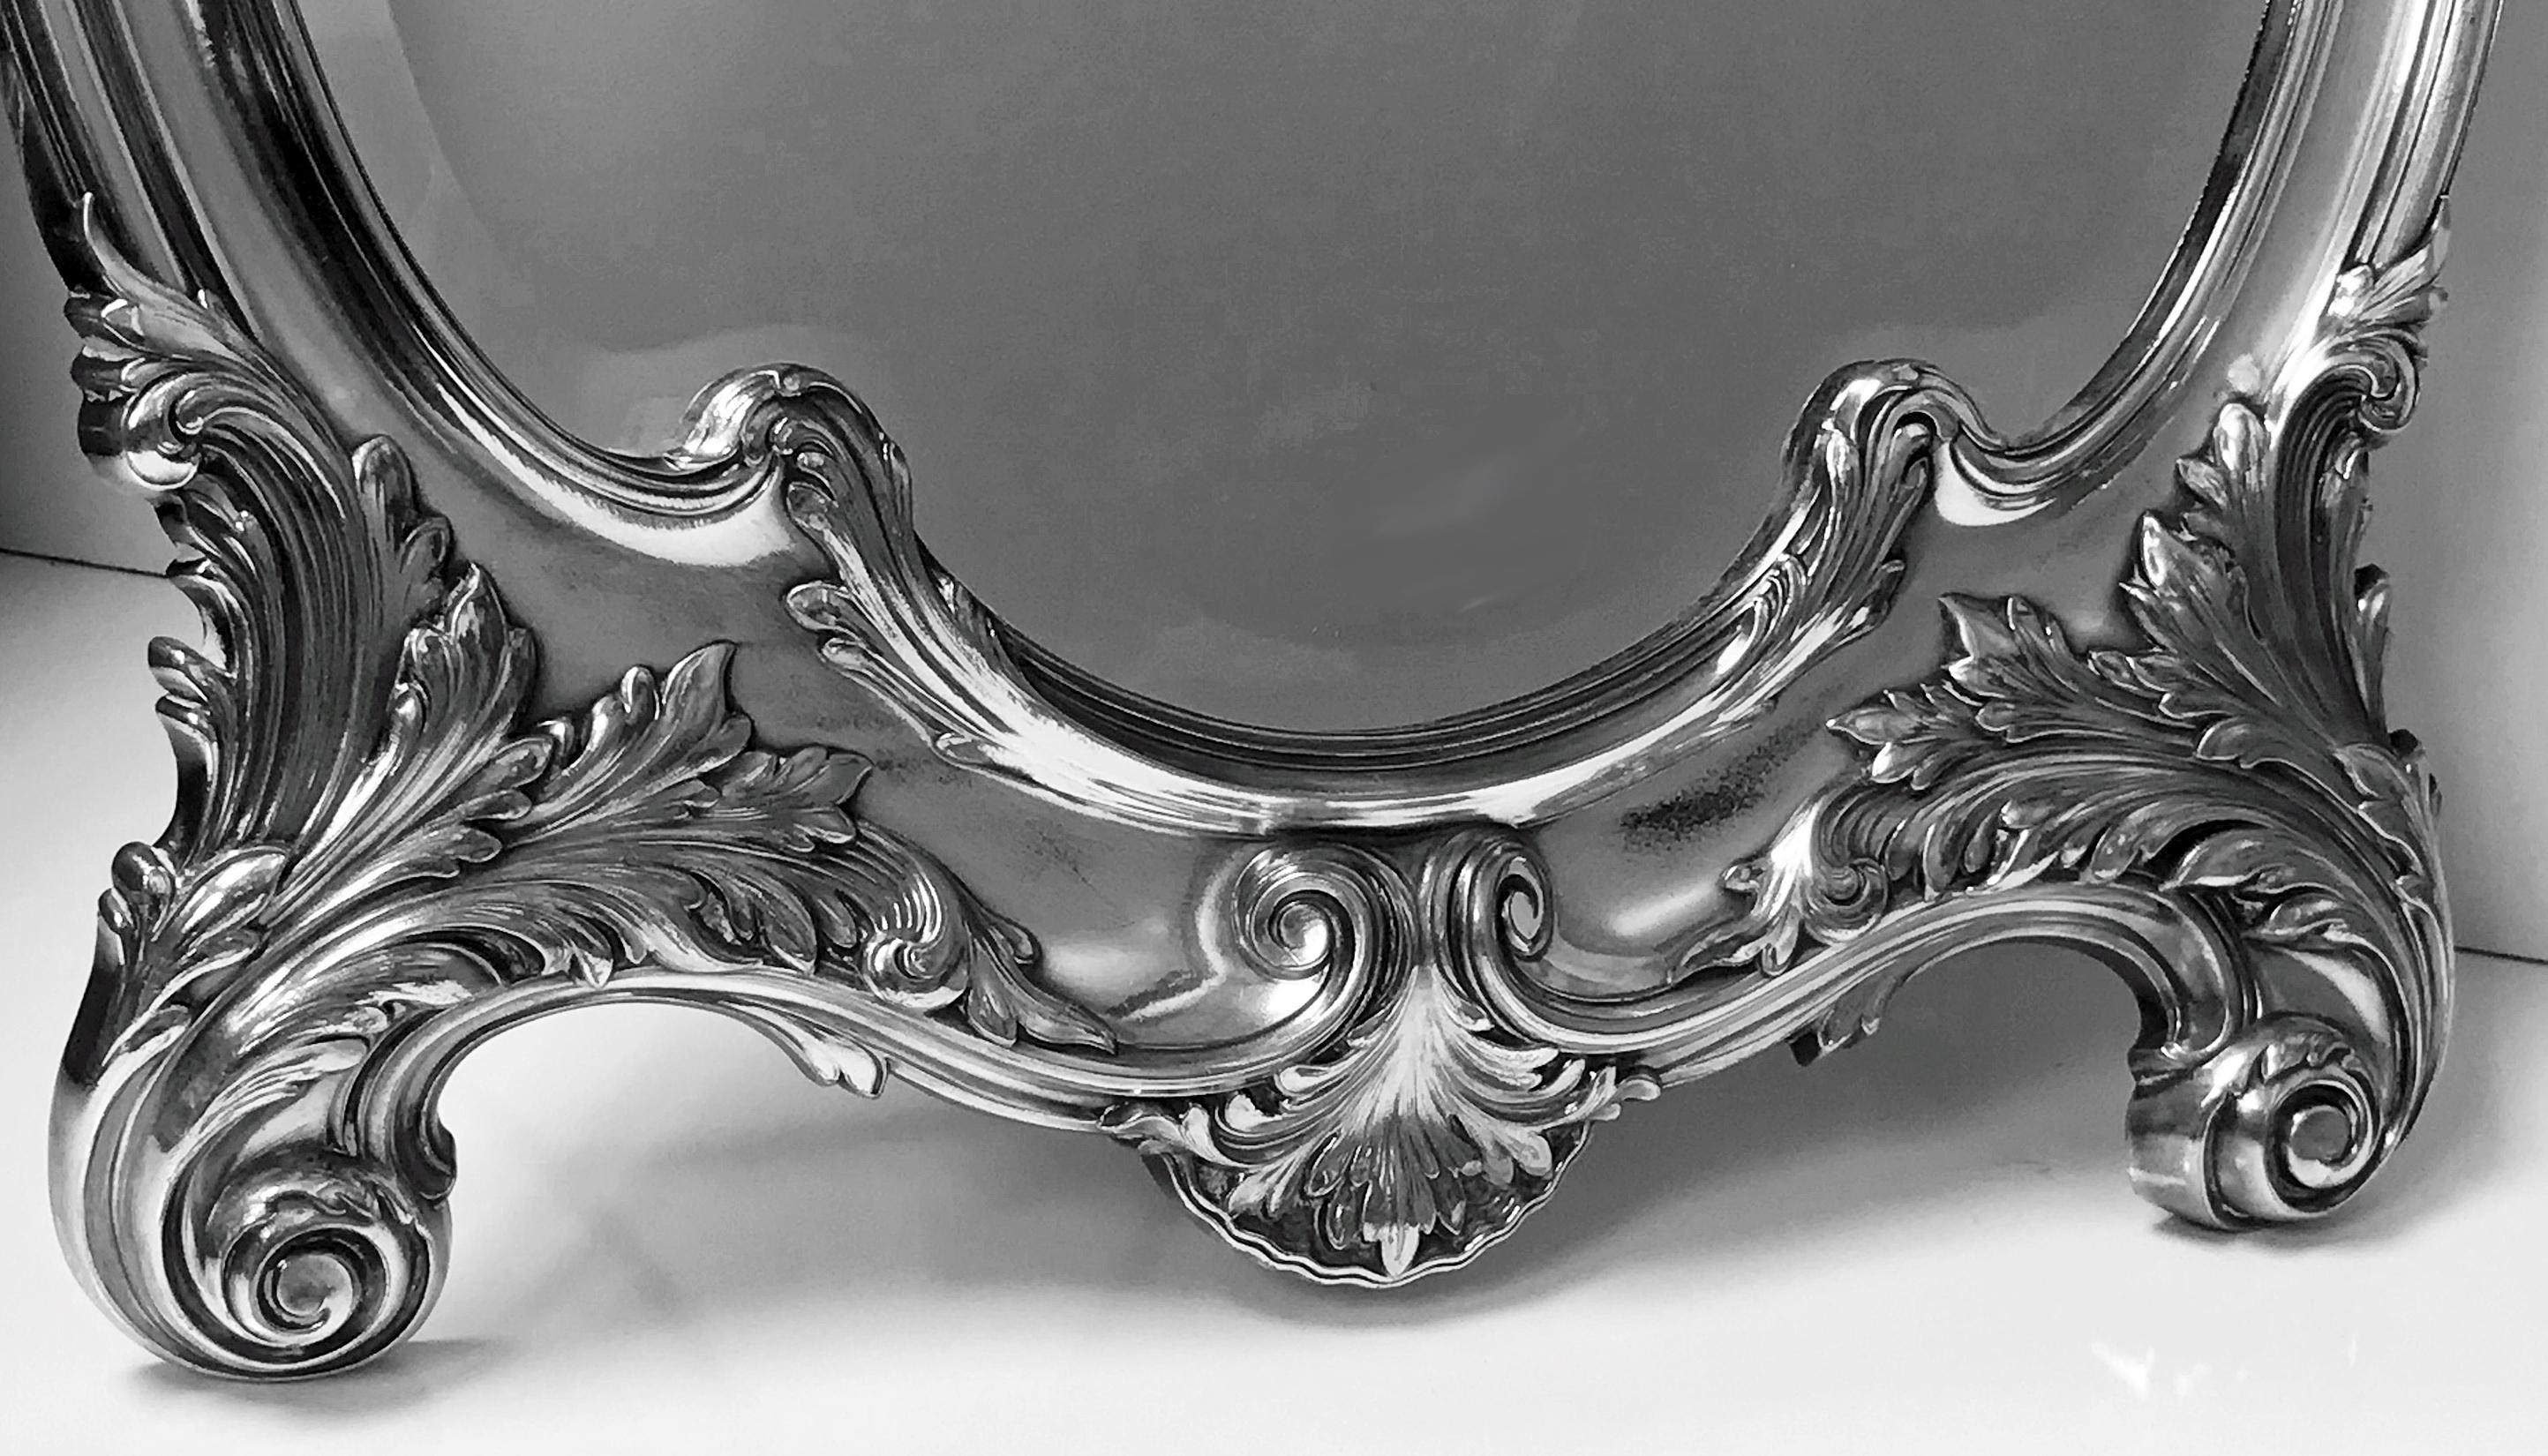 WMF large Art Nouveau silver on pewter mirror, Germany, circa 1900. The original bevelled mirror conforming to shaped foliage design, original easel and back. WMF G beehive mark and numbered 11241. Measures: Height 23 inches, width 14 inches.